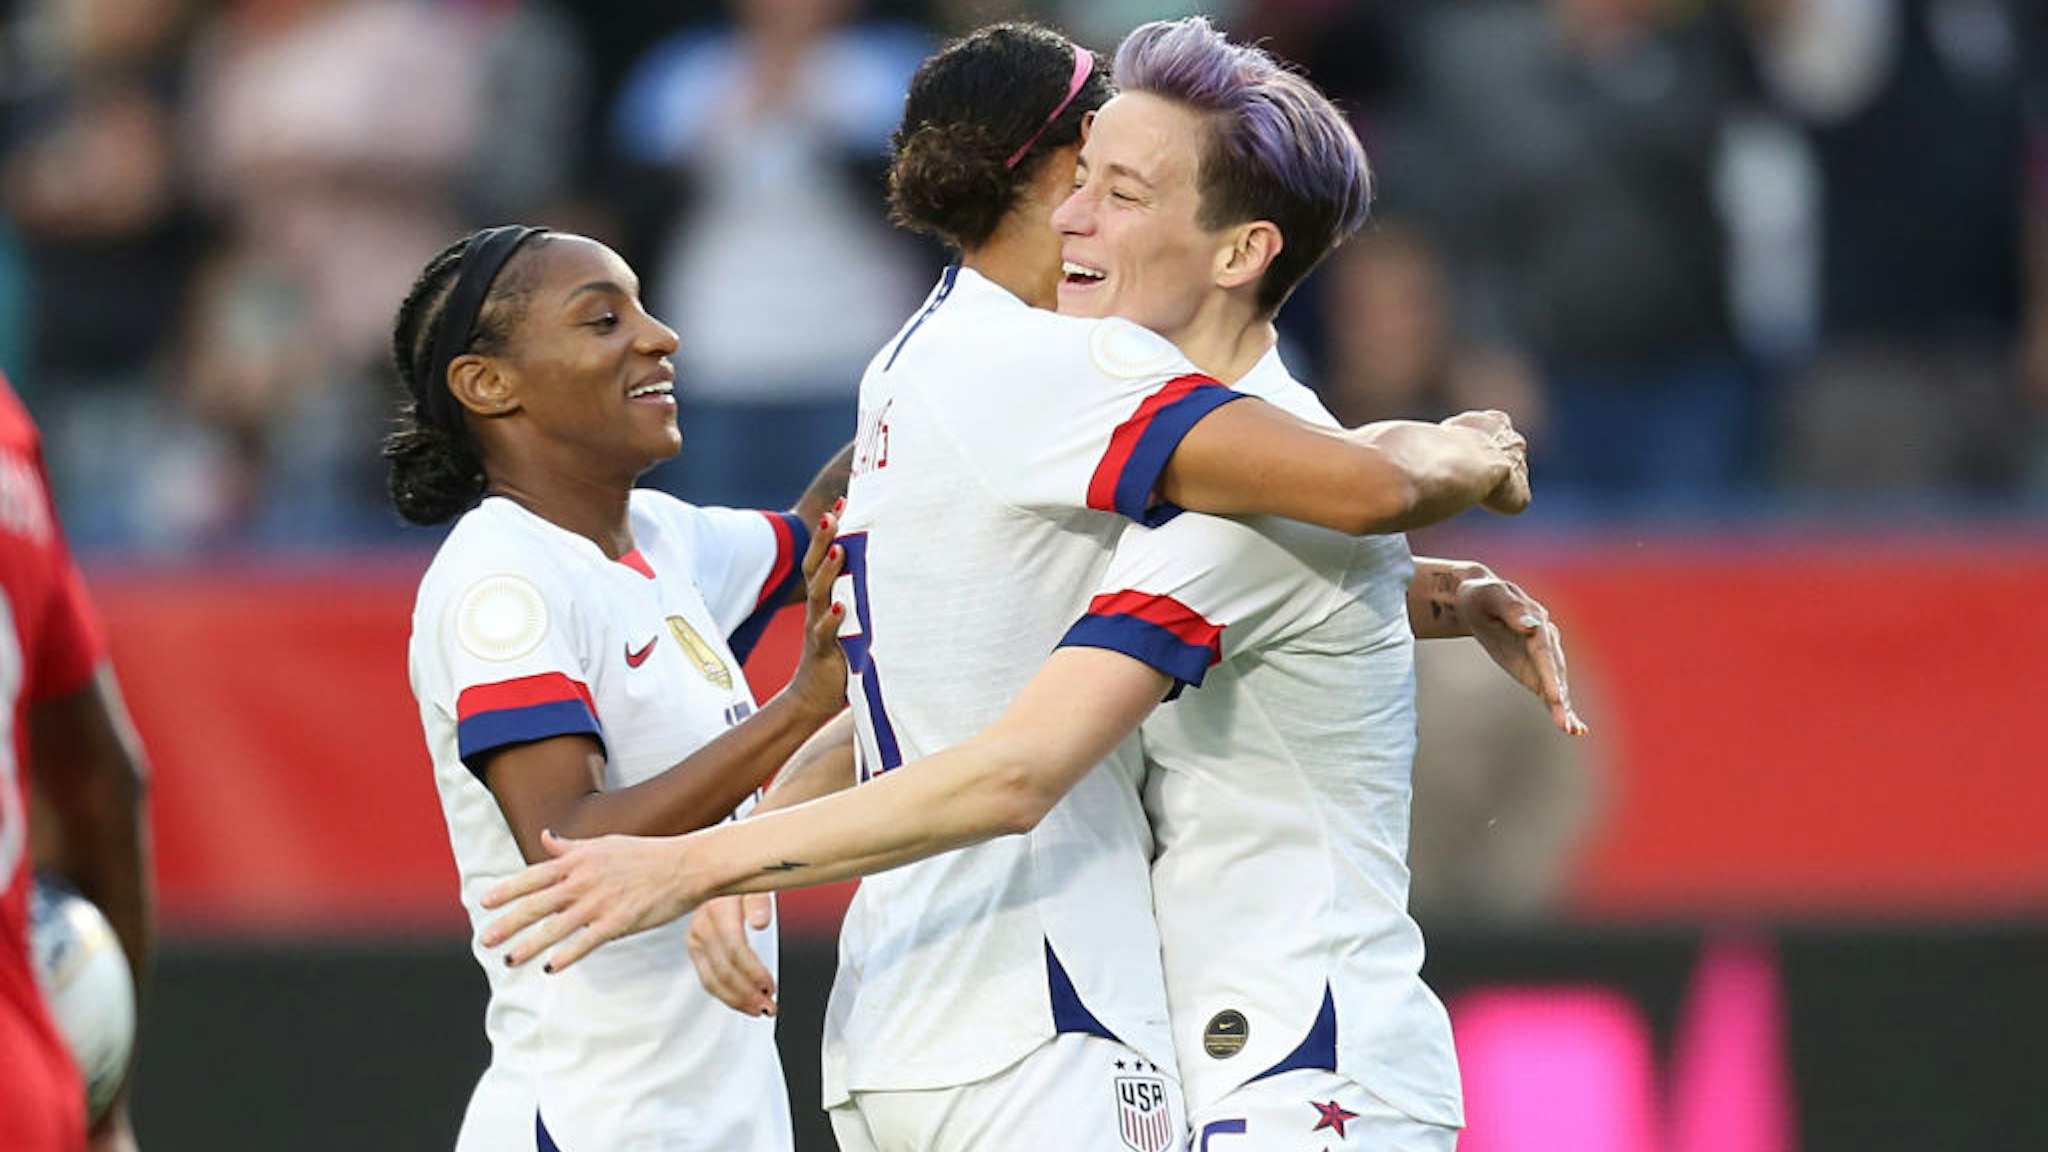 Megan Rapinoe #15 of USA celebrates with his team mate Lynn Williams #13 after scores 3rd goal for his team during the Final game between Canada and United States as part of the 2020 CONCACAF Women's Olympic Qualifying at Dignity Health Sports Park on February 9, 2020 in Carson, California.